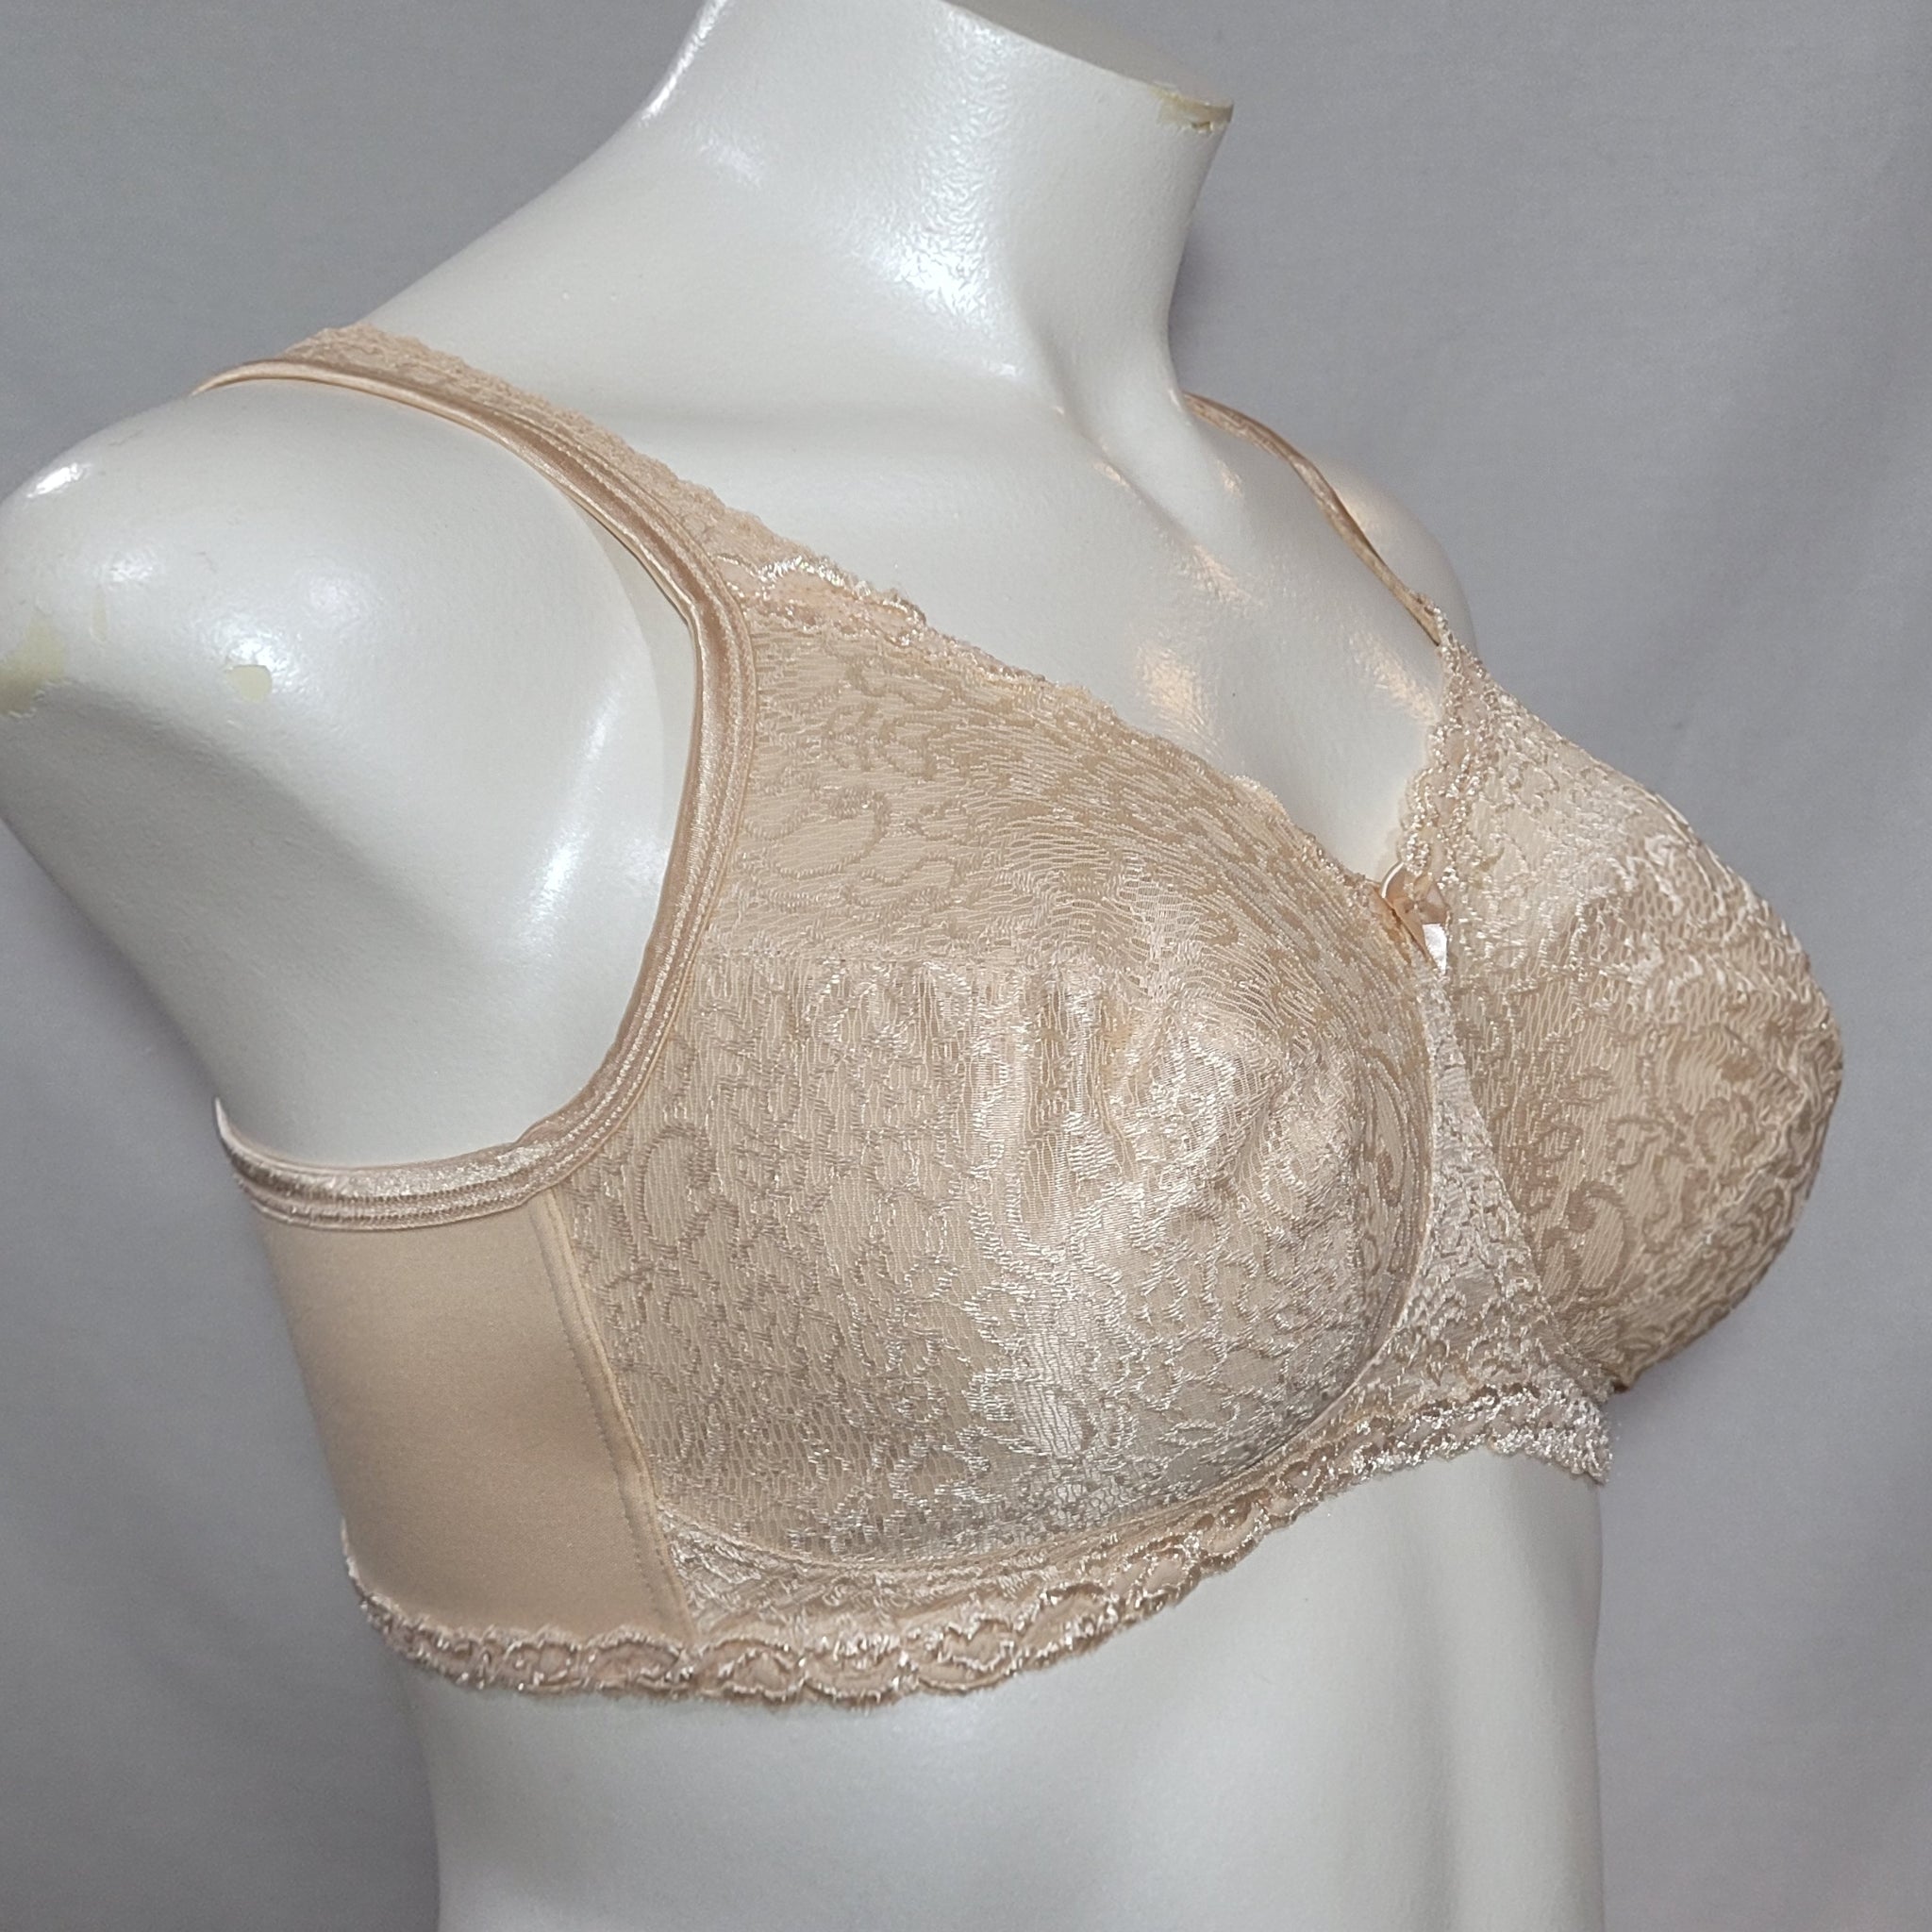 Buy Playtex 18 Hour 4088 Breathable Comfort Lace Wirefree Bra